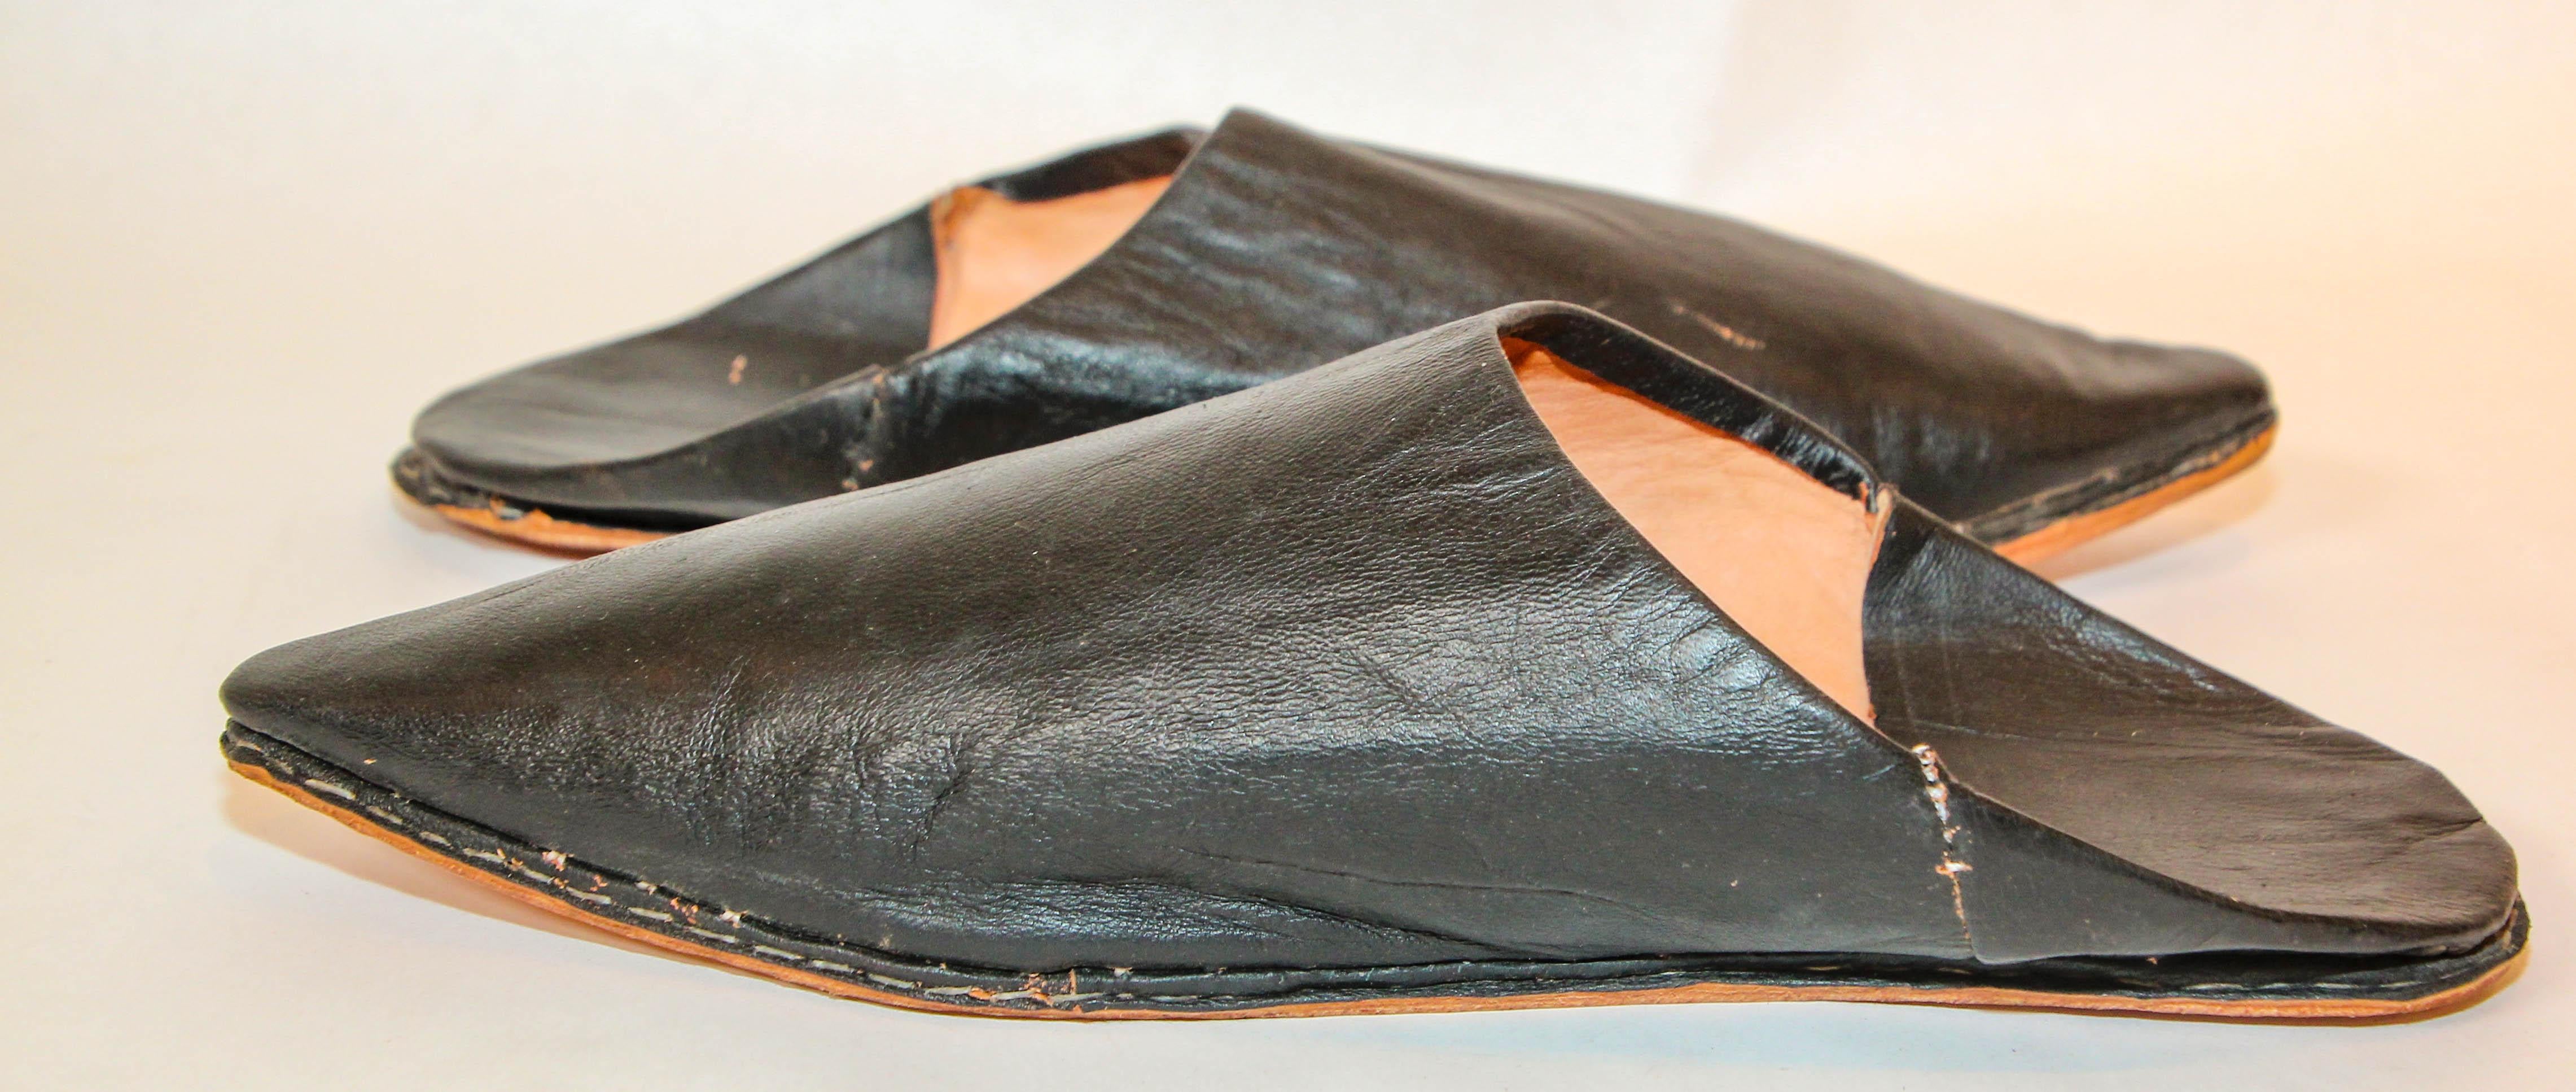 Moroccan Pointed Babouche Black Leather Slippers In Good Condition For Sale In North Hollywood, CA